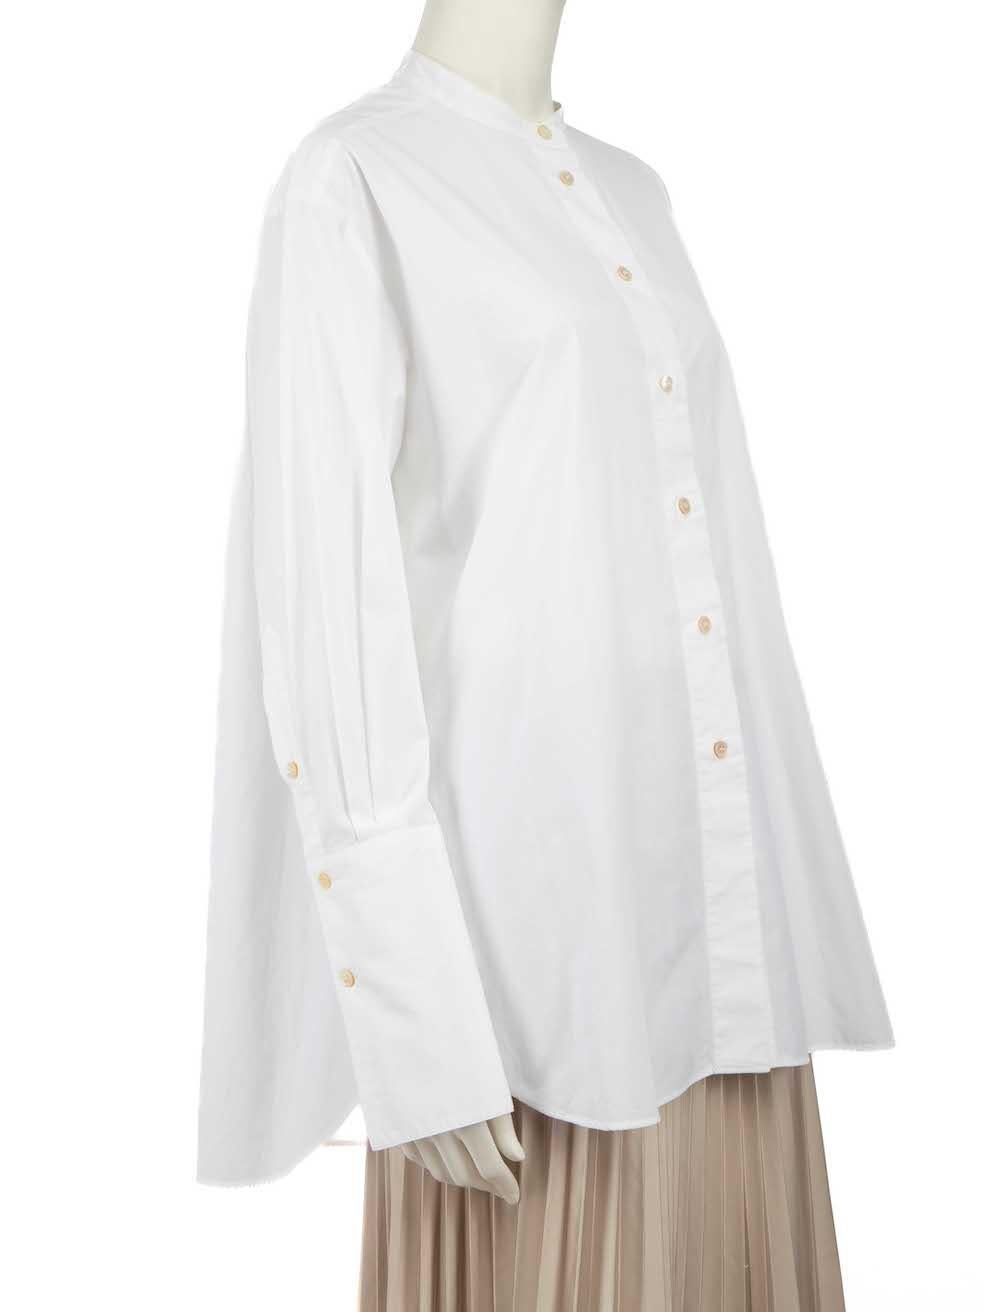 CONDITION is Very good. Hardly any visible wear to shirt is evident on this used Studio Nicholson designer resale item.
 
 
 
 Details
 
 
 White
 
 Cotton
 
 Shirt
 
 Collarless
 
 Round neck
 
 Long sleeves
 
 Button up fastening
 
 Button up